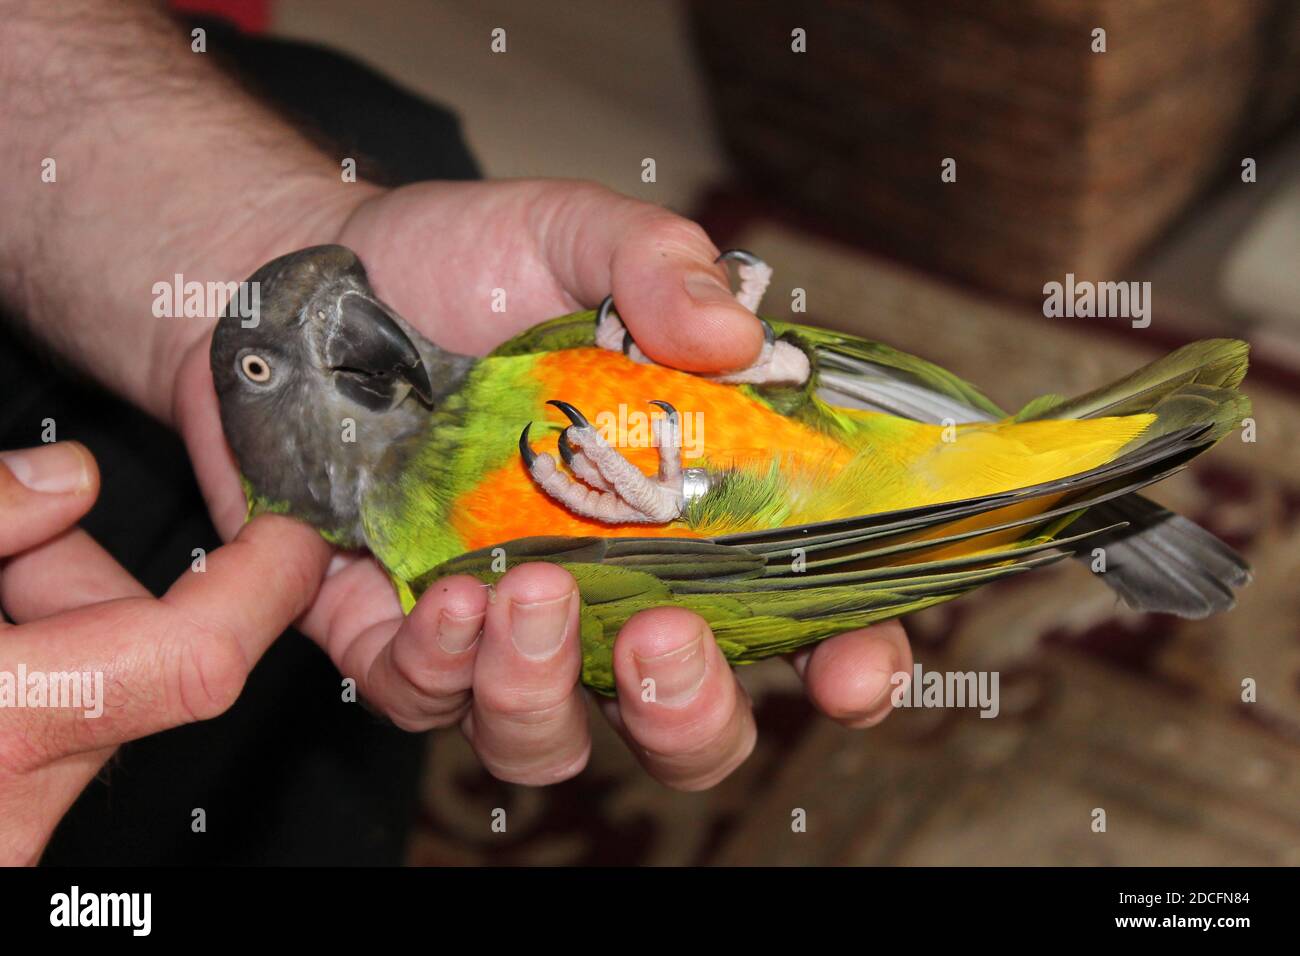 Senegal parrot latin name Poicephalus senegalus lying on her back in owners hand. Stock Photo